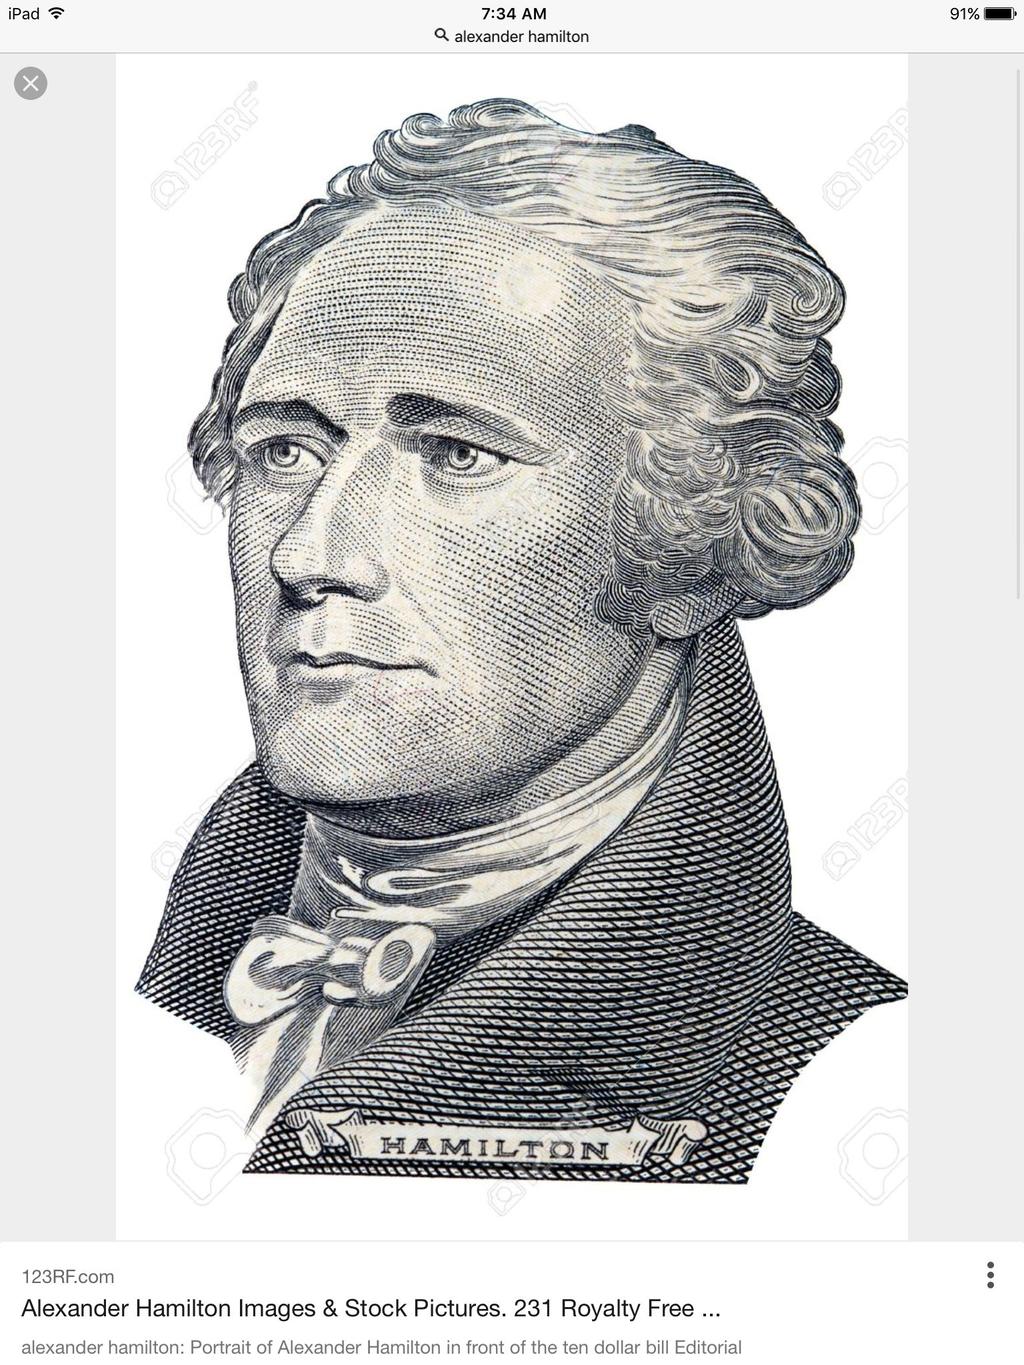 History of Hamilton s Method -The apportionment method was suggested by Alexander Hamilton was approved by Congress in 1791.